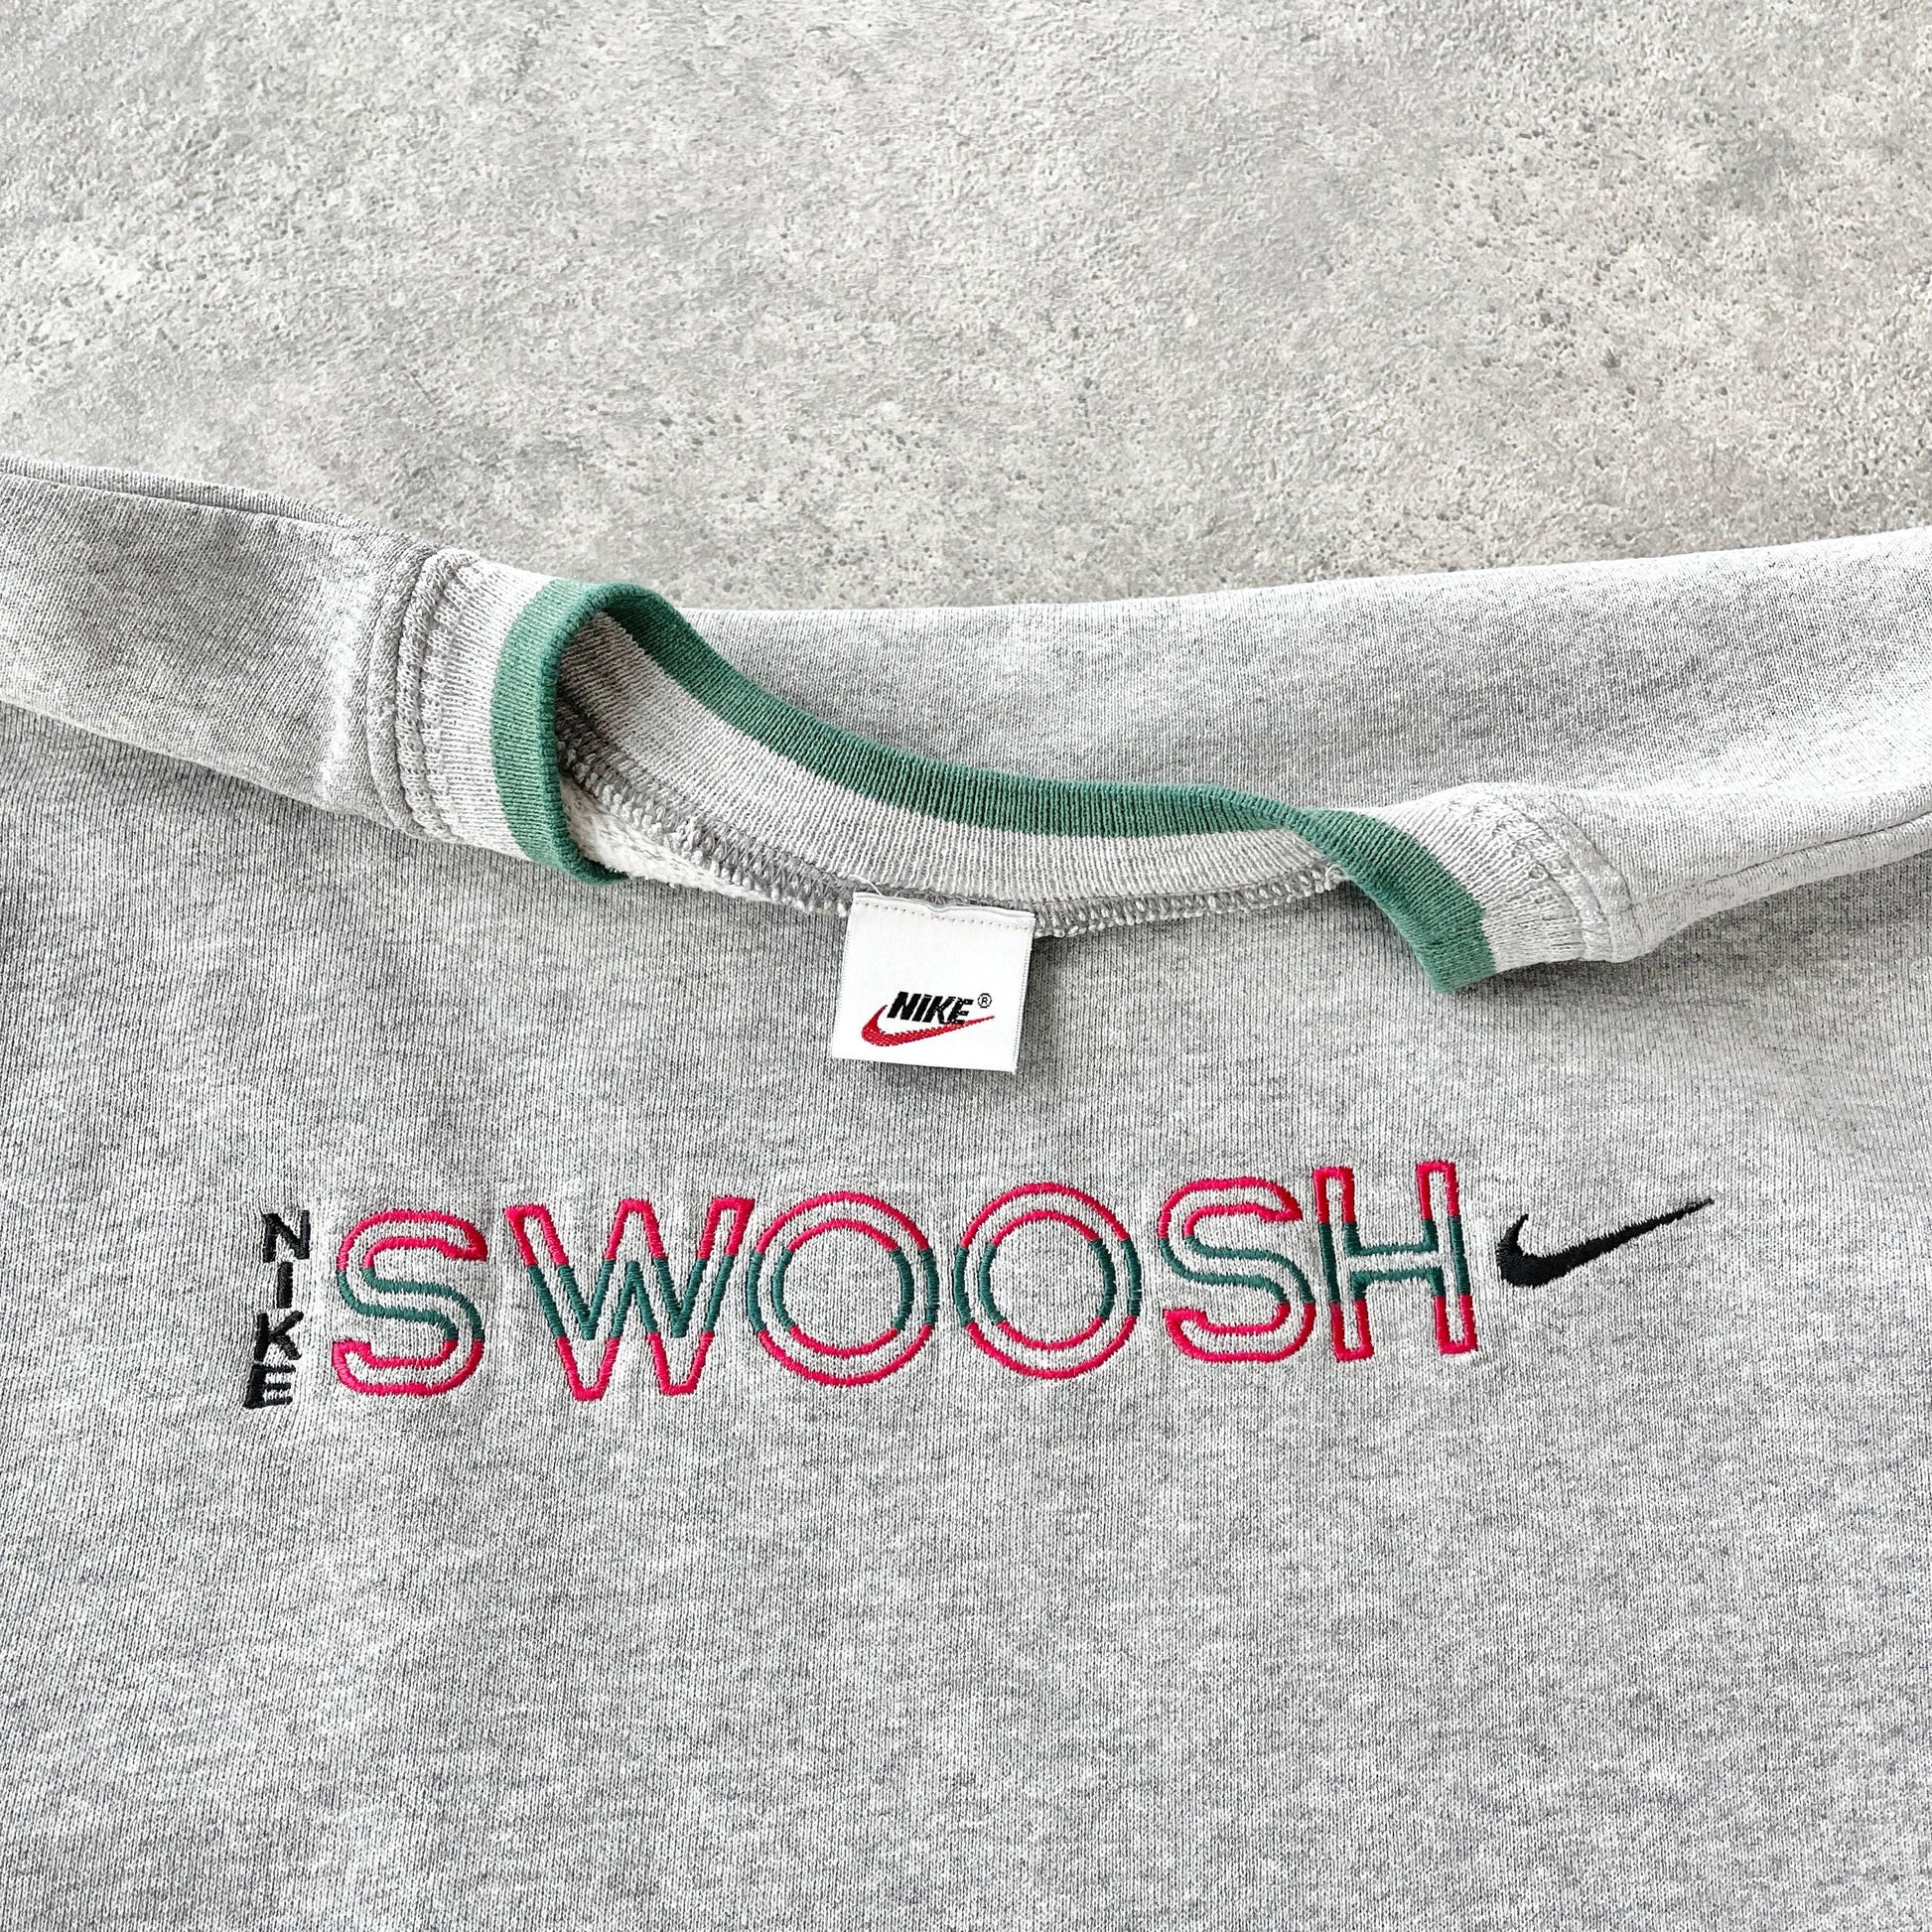 Nike 1990s heavyweight embroidered sweatshirt (M) - Known Source